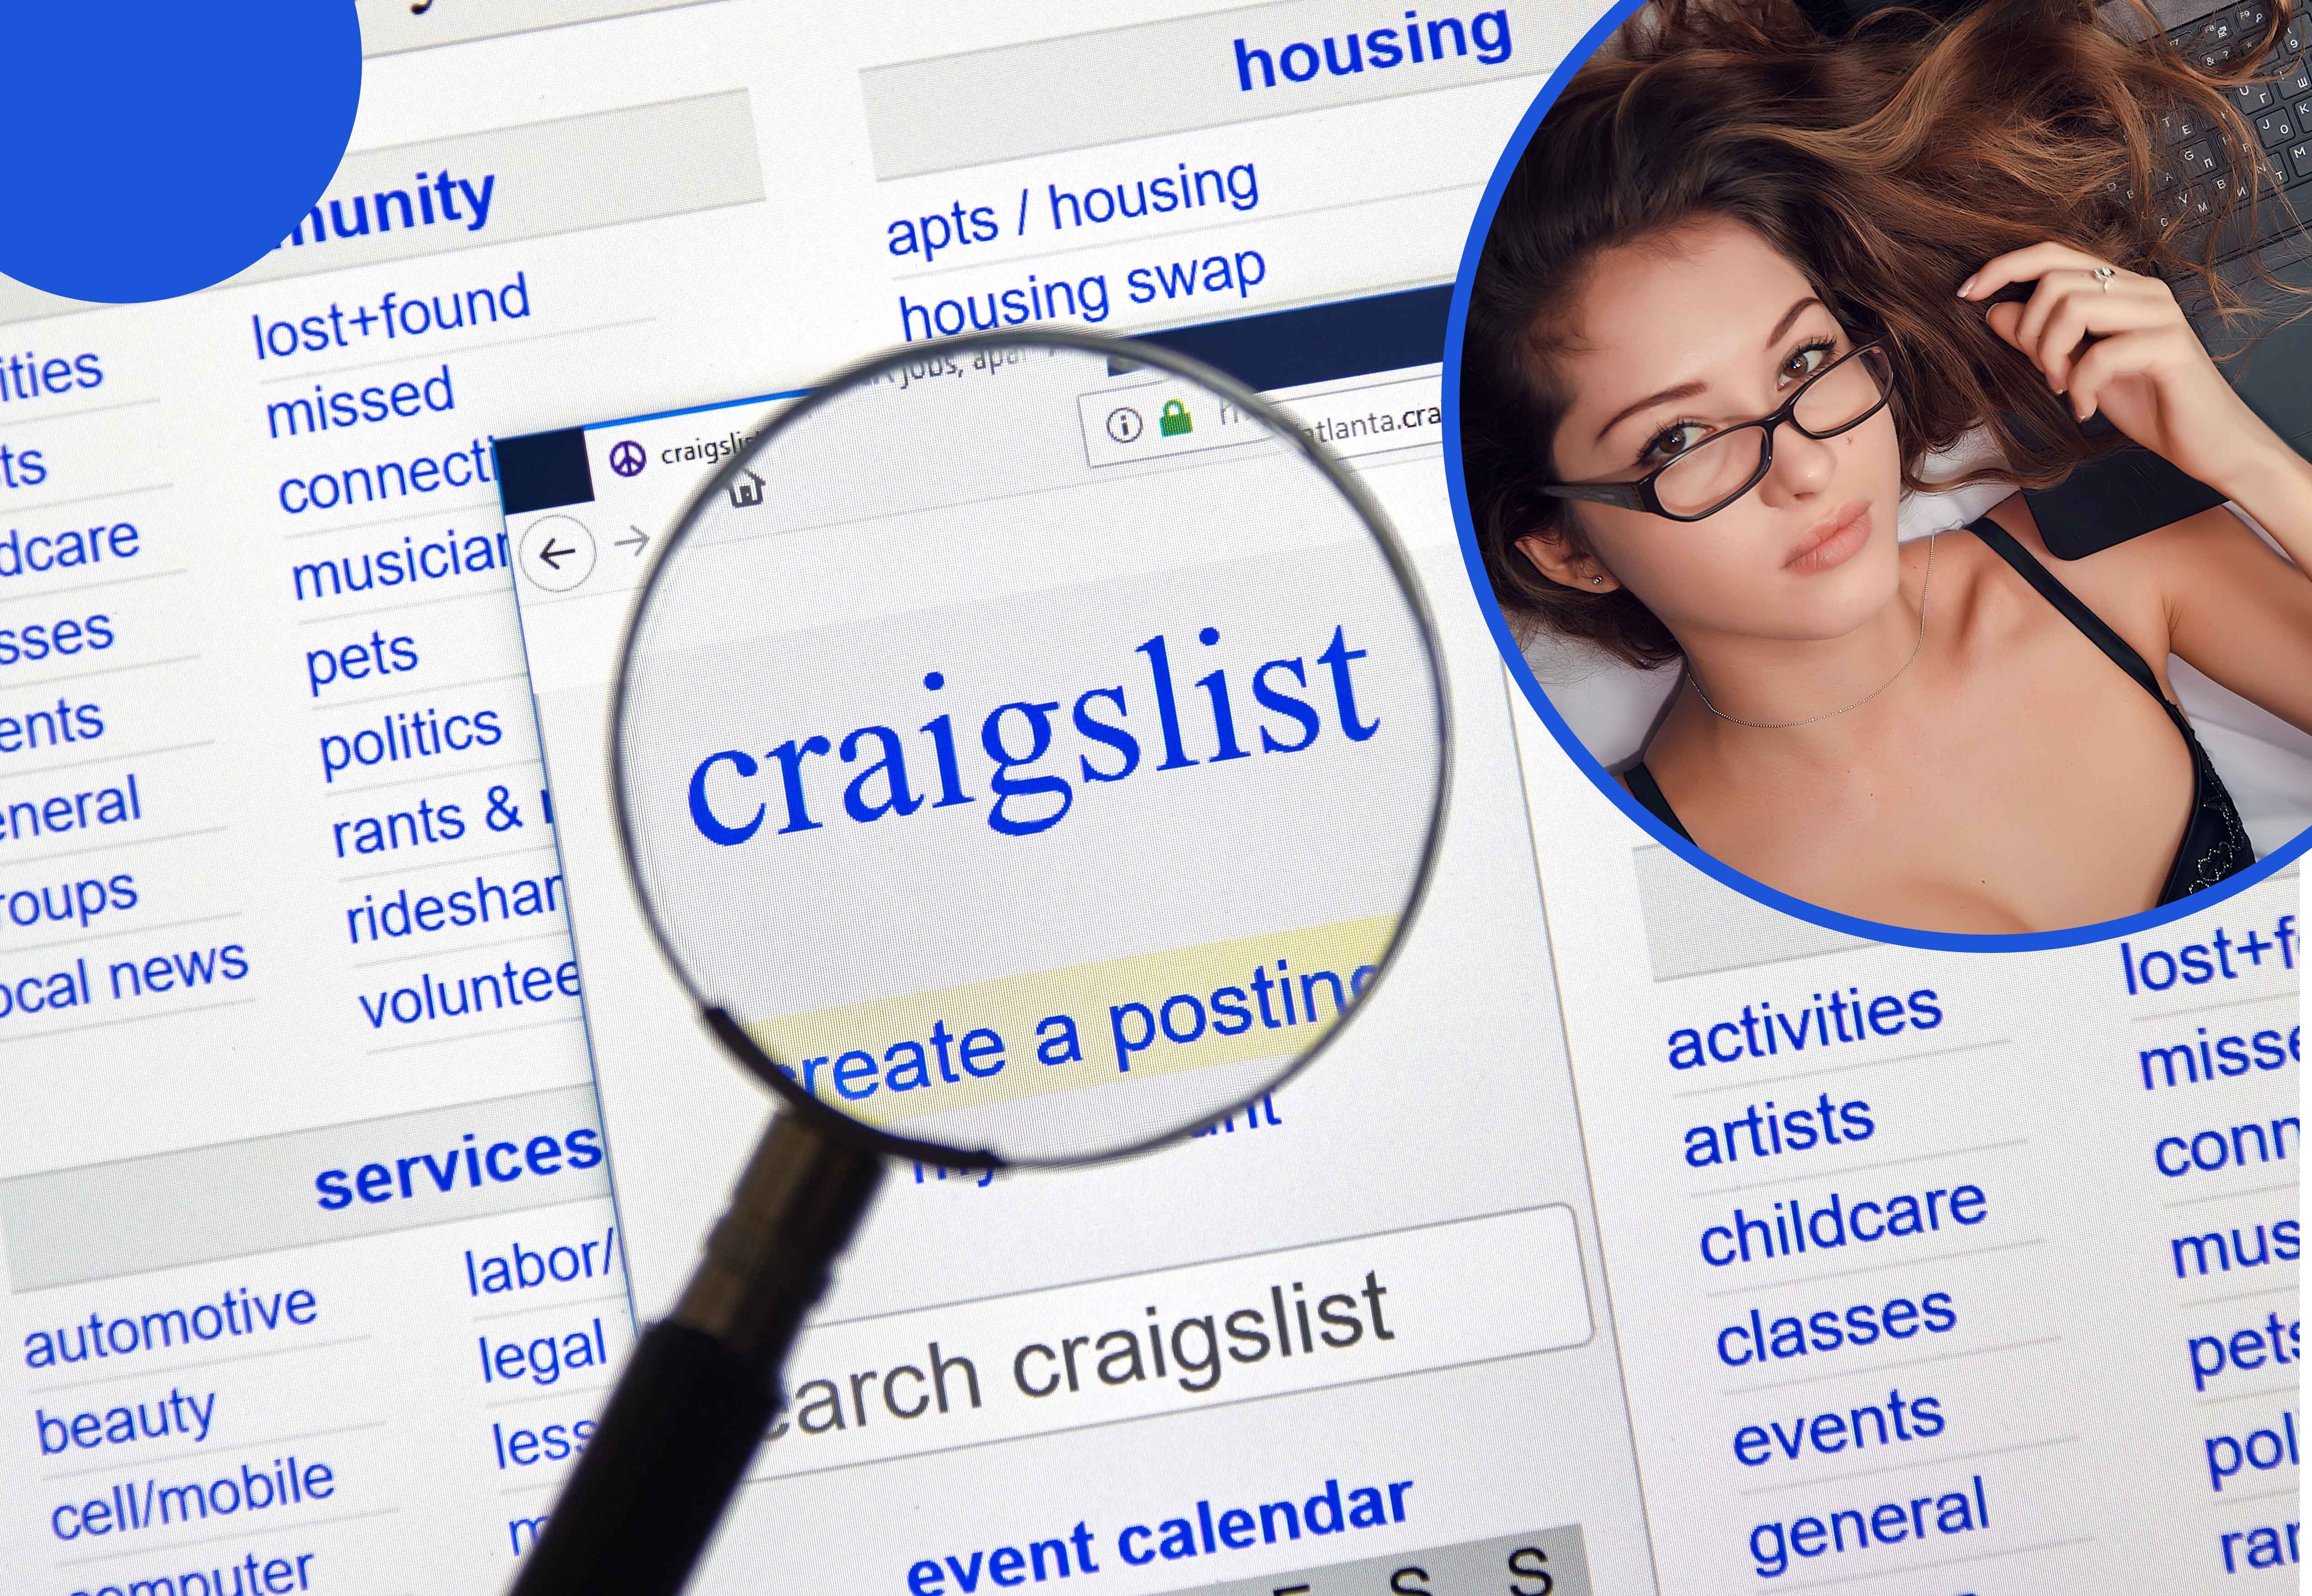 15 Best Online Personals - List of Sites That Replaced Craigslist Personals (Local Sex Classifieds)